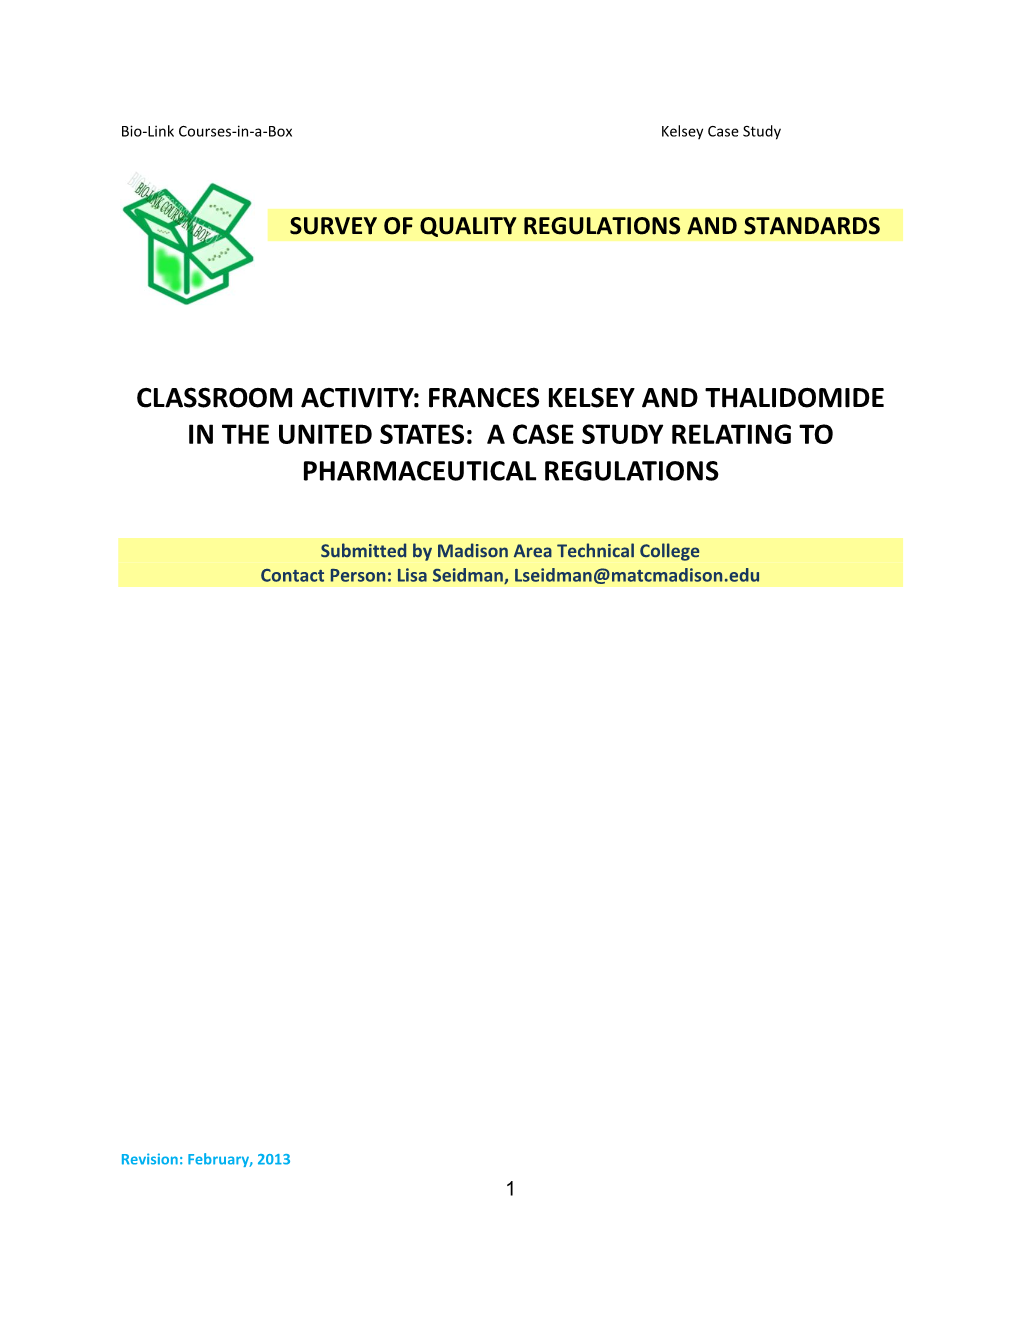 Classroom Activity: Frances Kelsey and Thalidomide in the United States: a Case Study Relating to Pharmaceutical Regulations